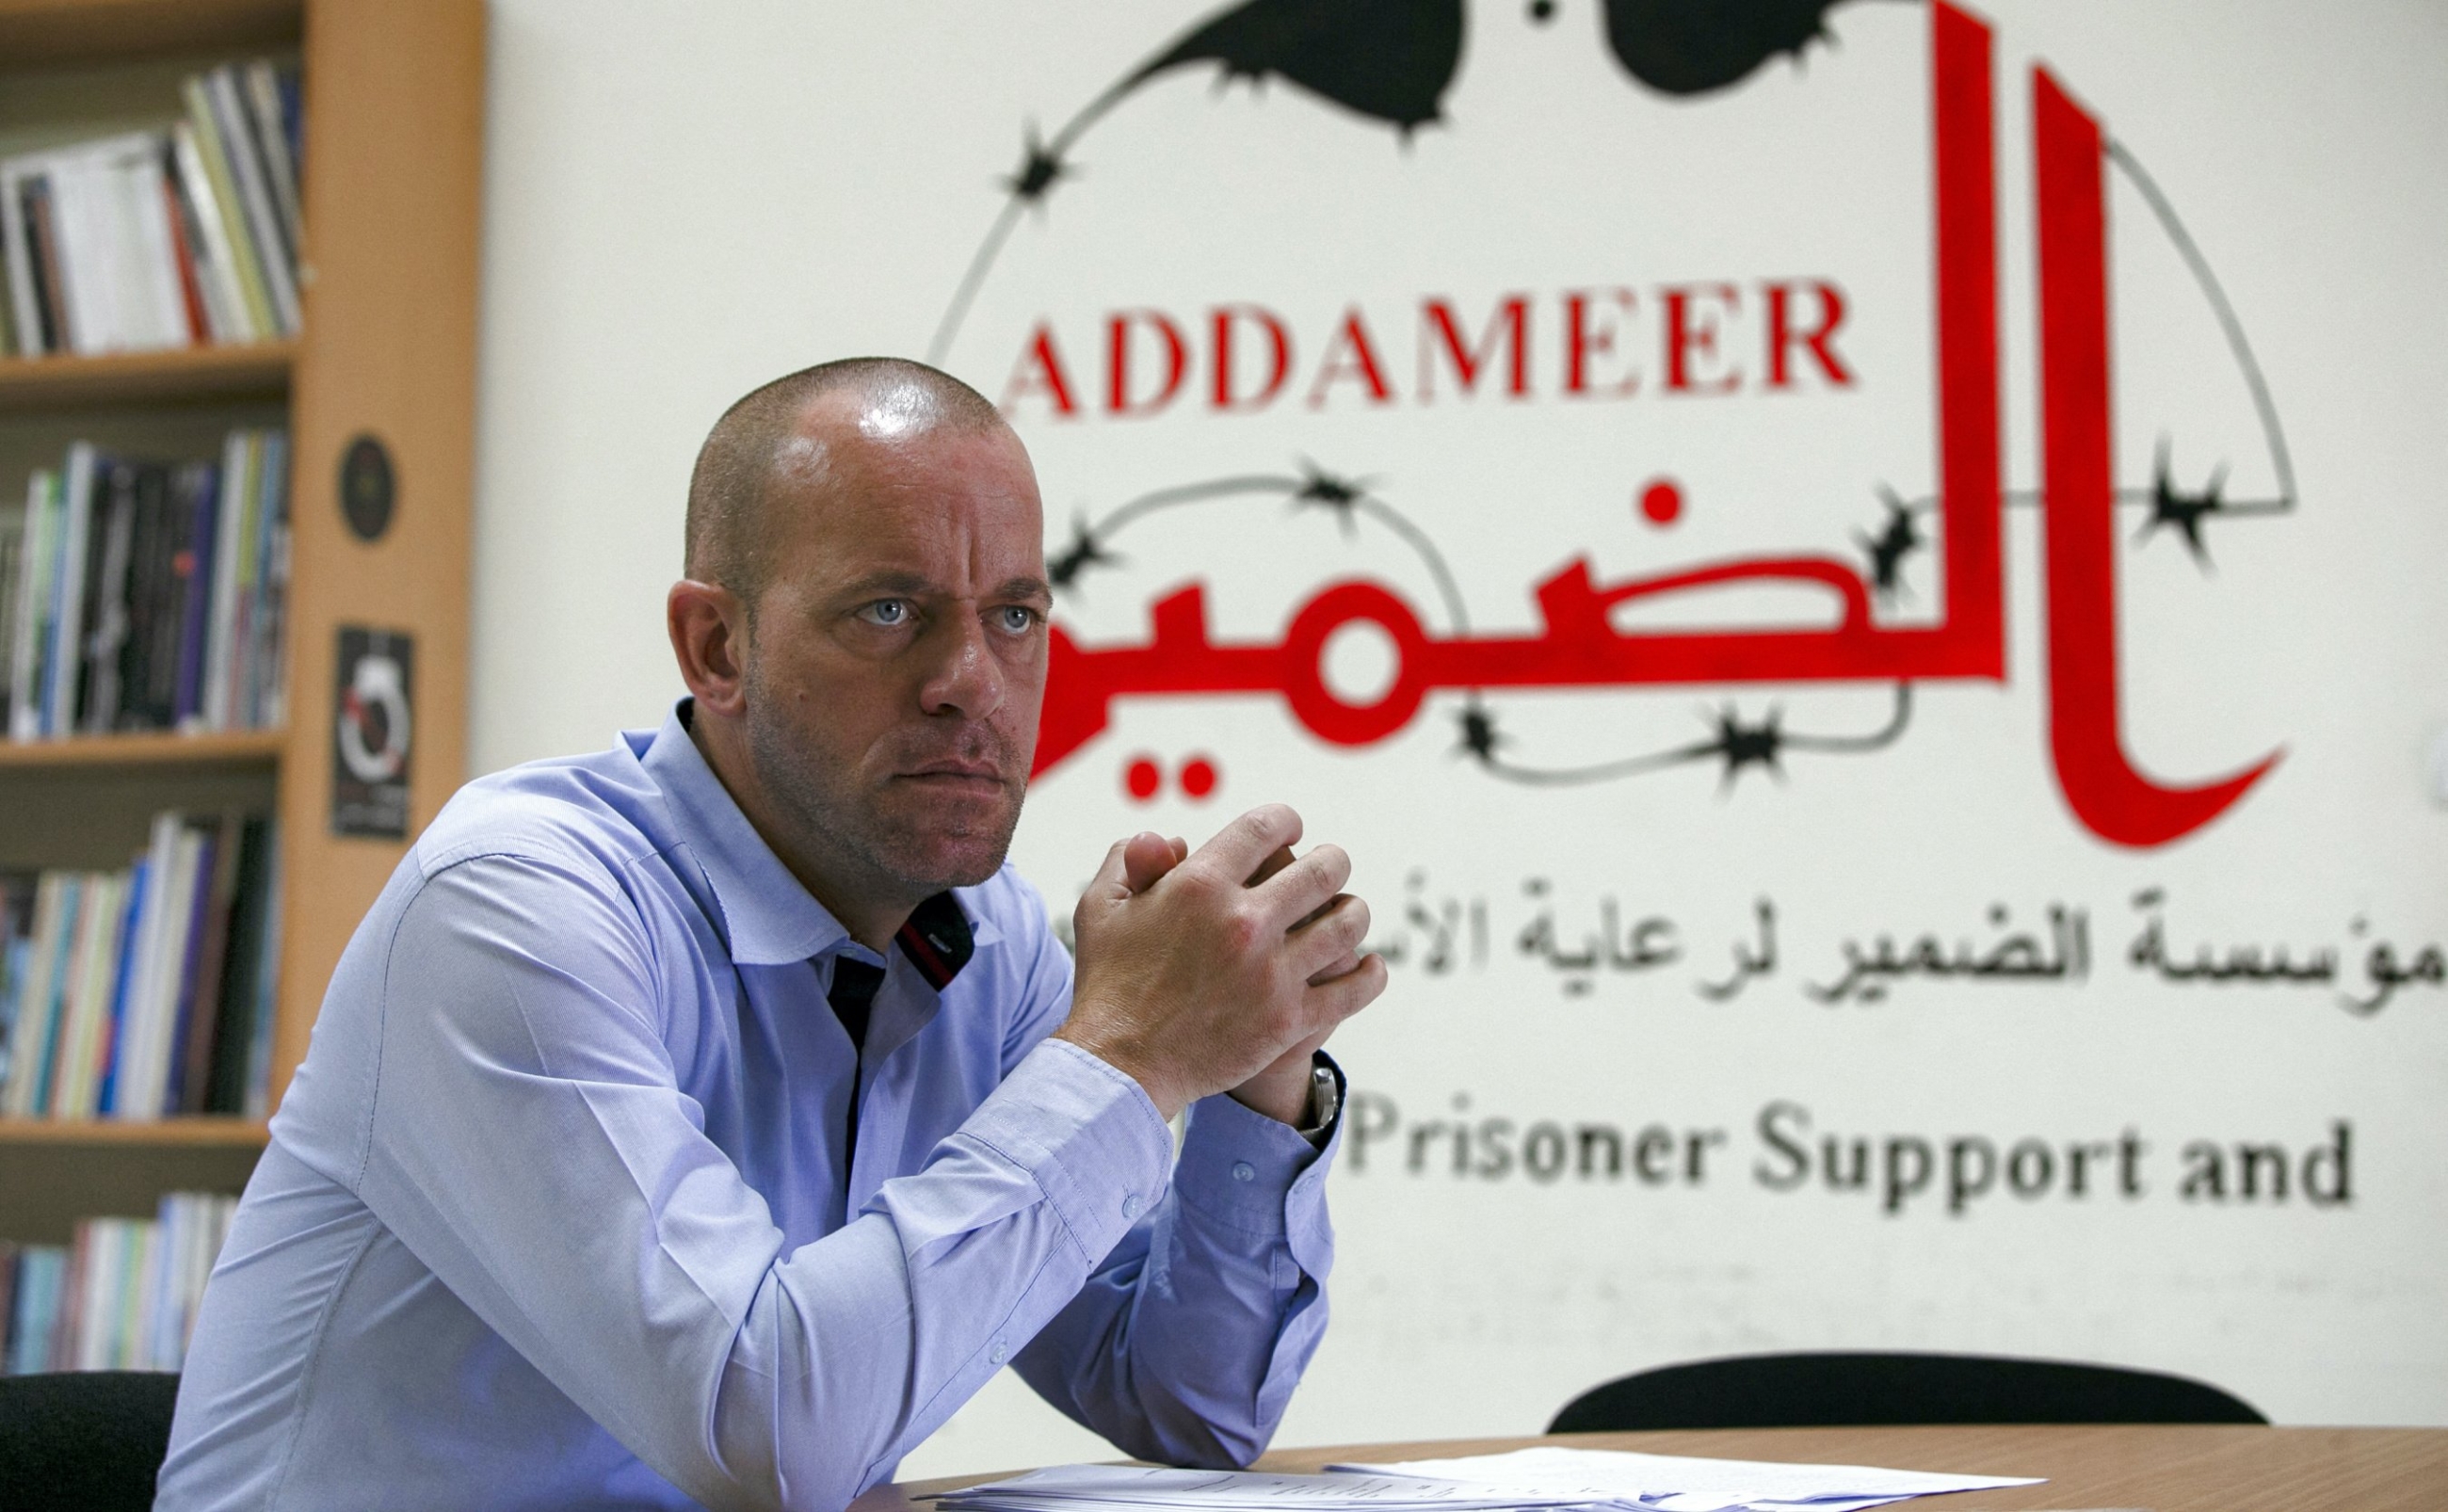 Franco-Palestinian lawyer Salah Hamouri has been held in administrative detention since March. Photo taken on 1 October 2020 (AFP)